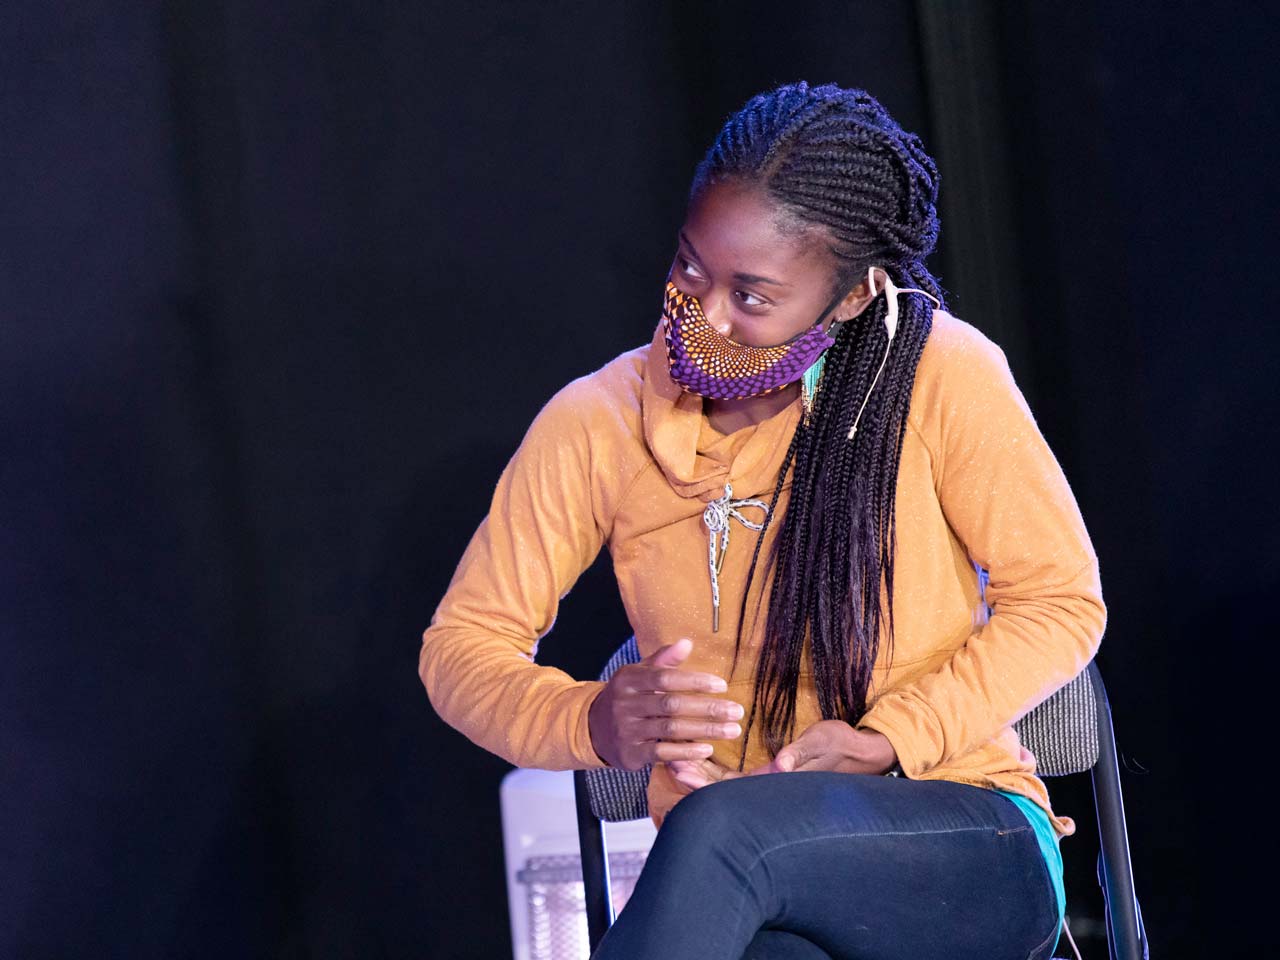 Union PDX - Festival:20 artist Oluyinka Akinjiola of Rejoice! Diaspora Dance Theatre wearing a yellow shirt speaks at the live-streamed artist discussion at Polaris Dance Theatre in Portland, Oregon | Photography: Jingzi Zhao